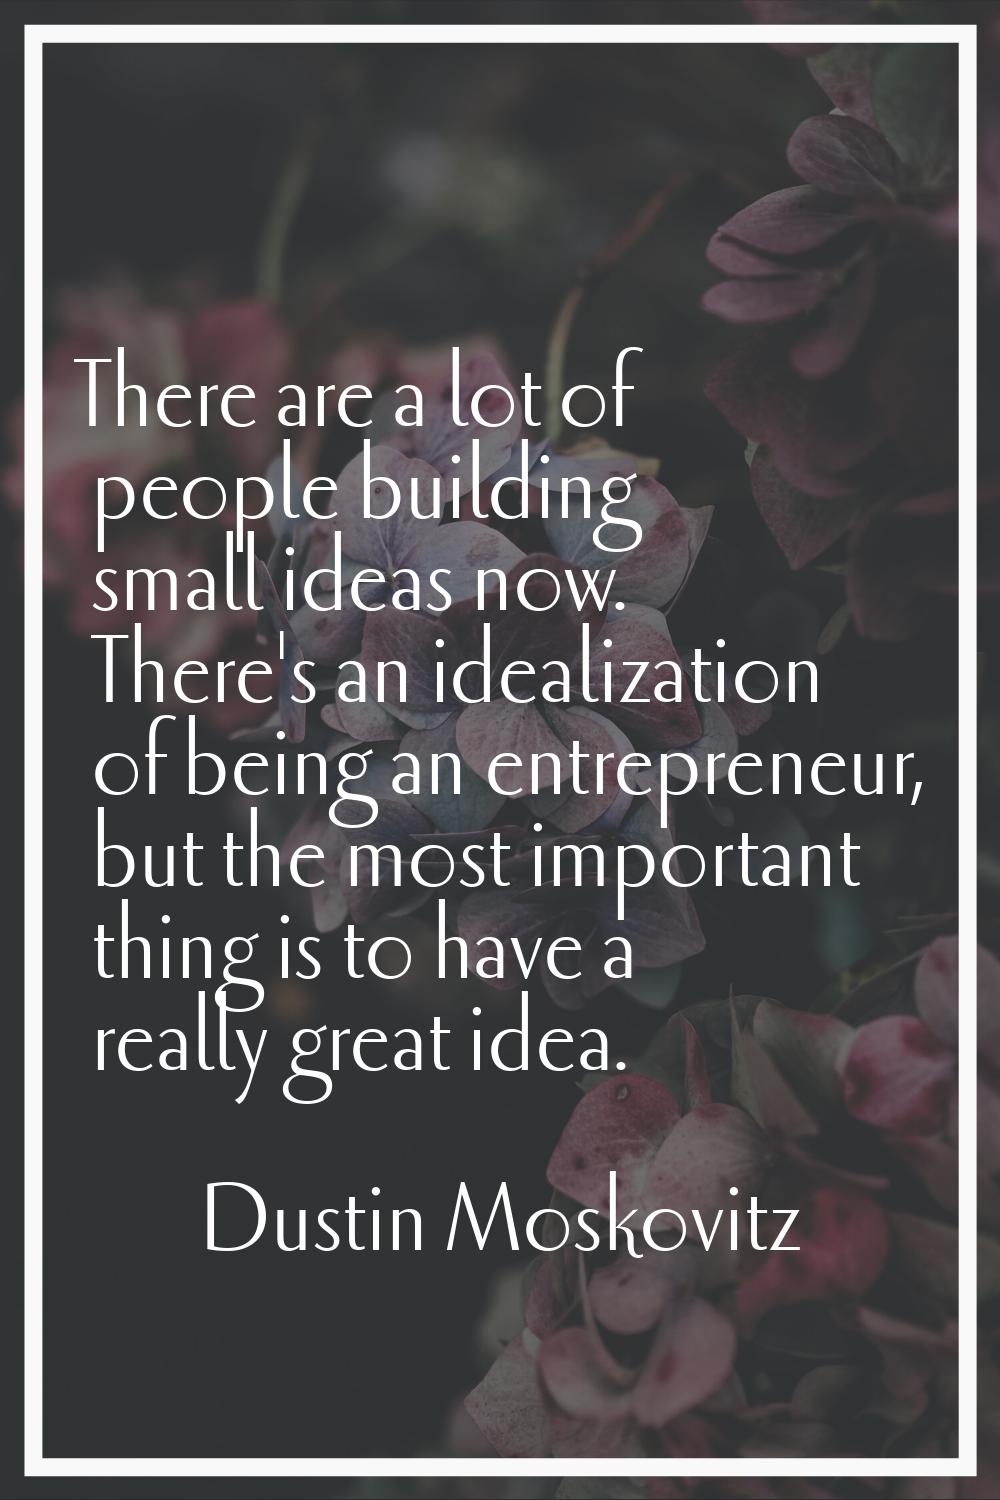 There are a lot of people building small ideas now. There's an idealization of being an entrepreneu